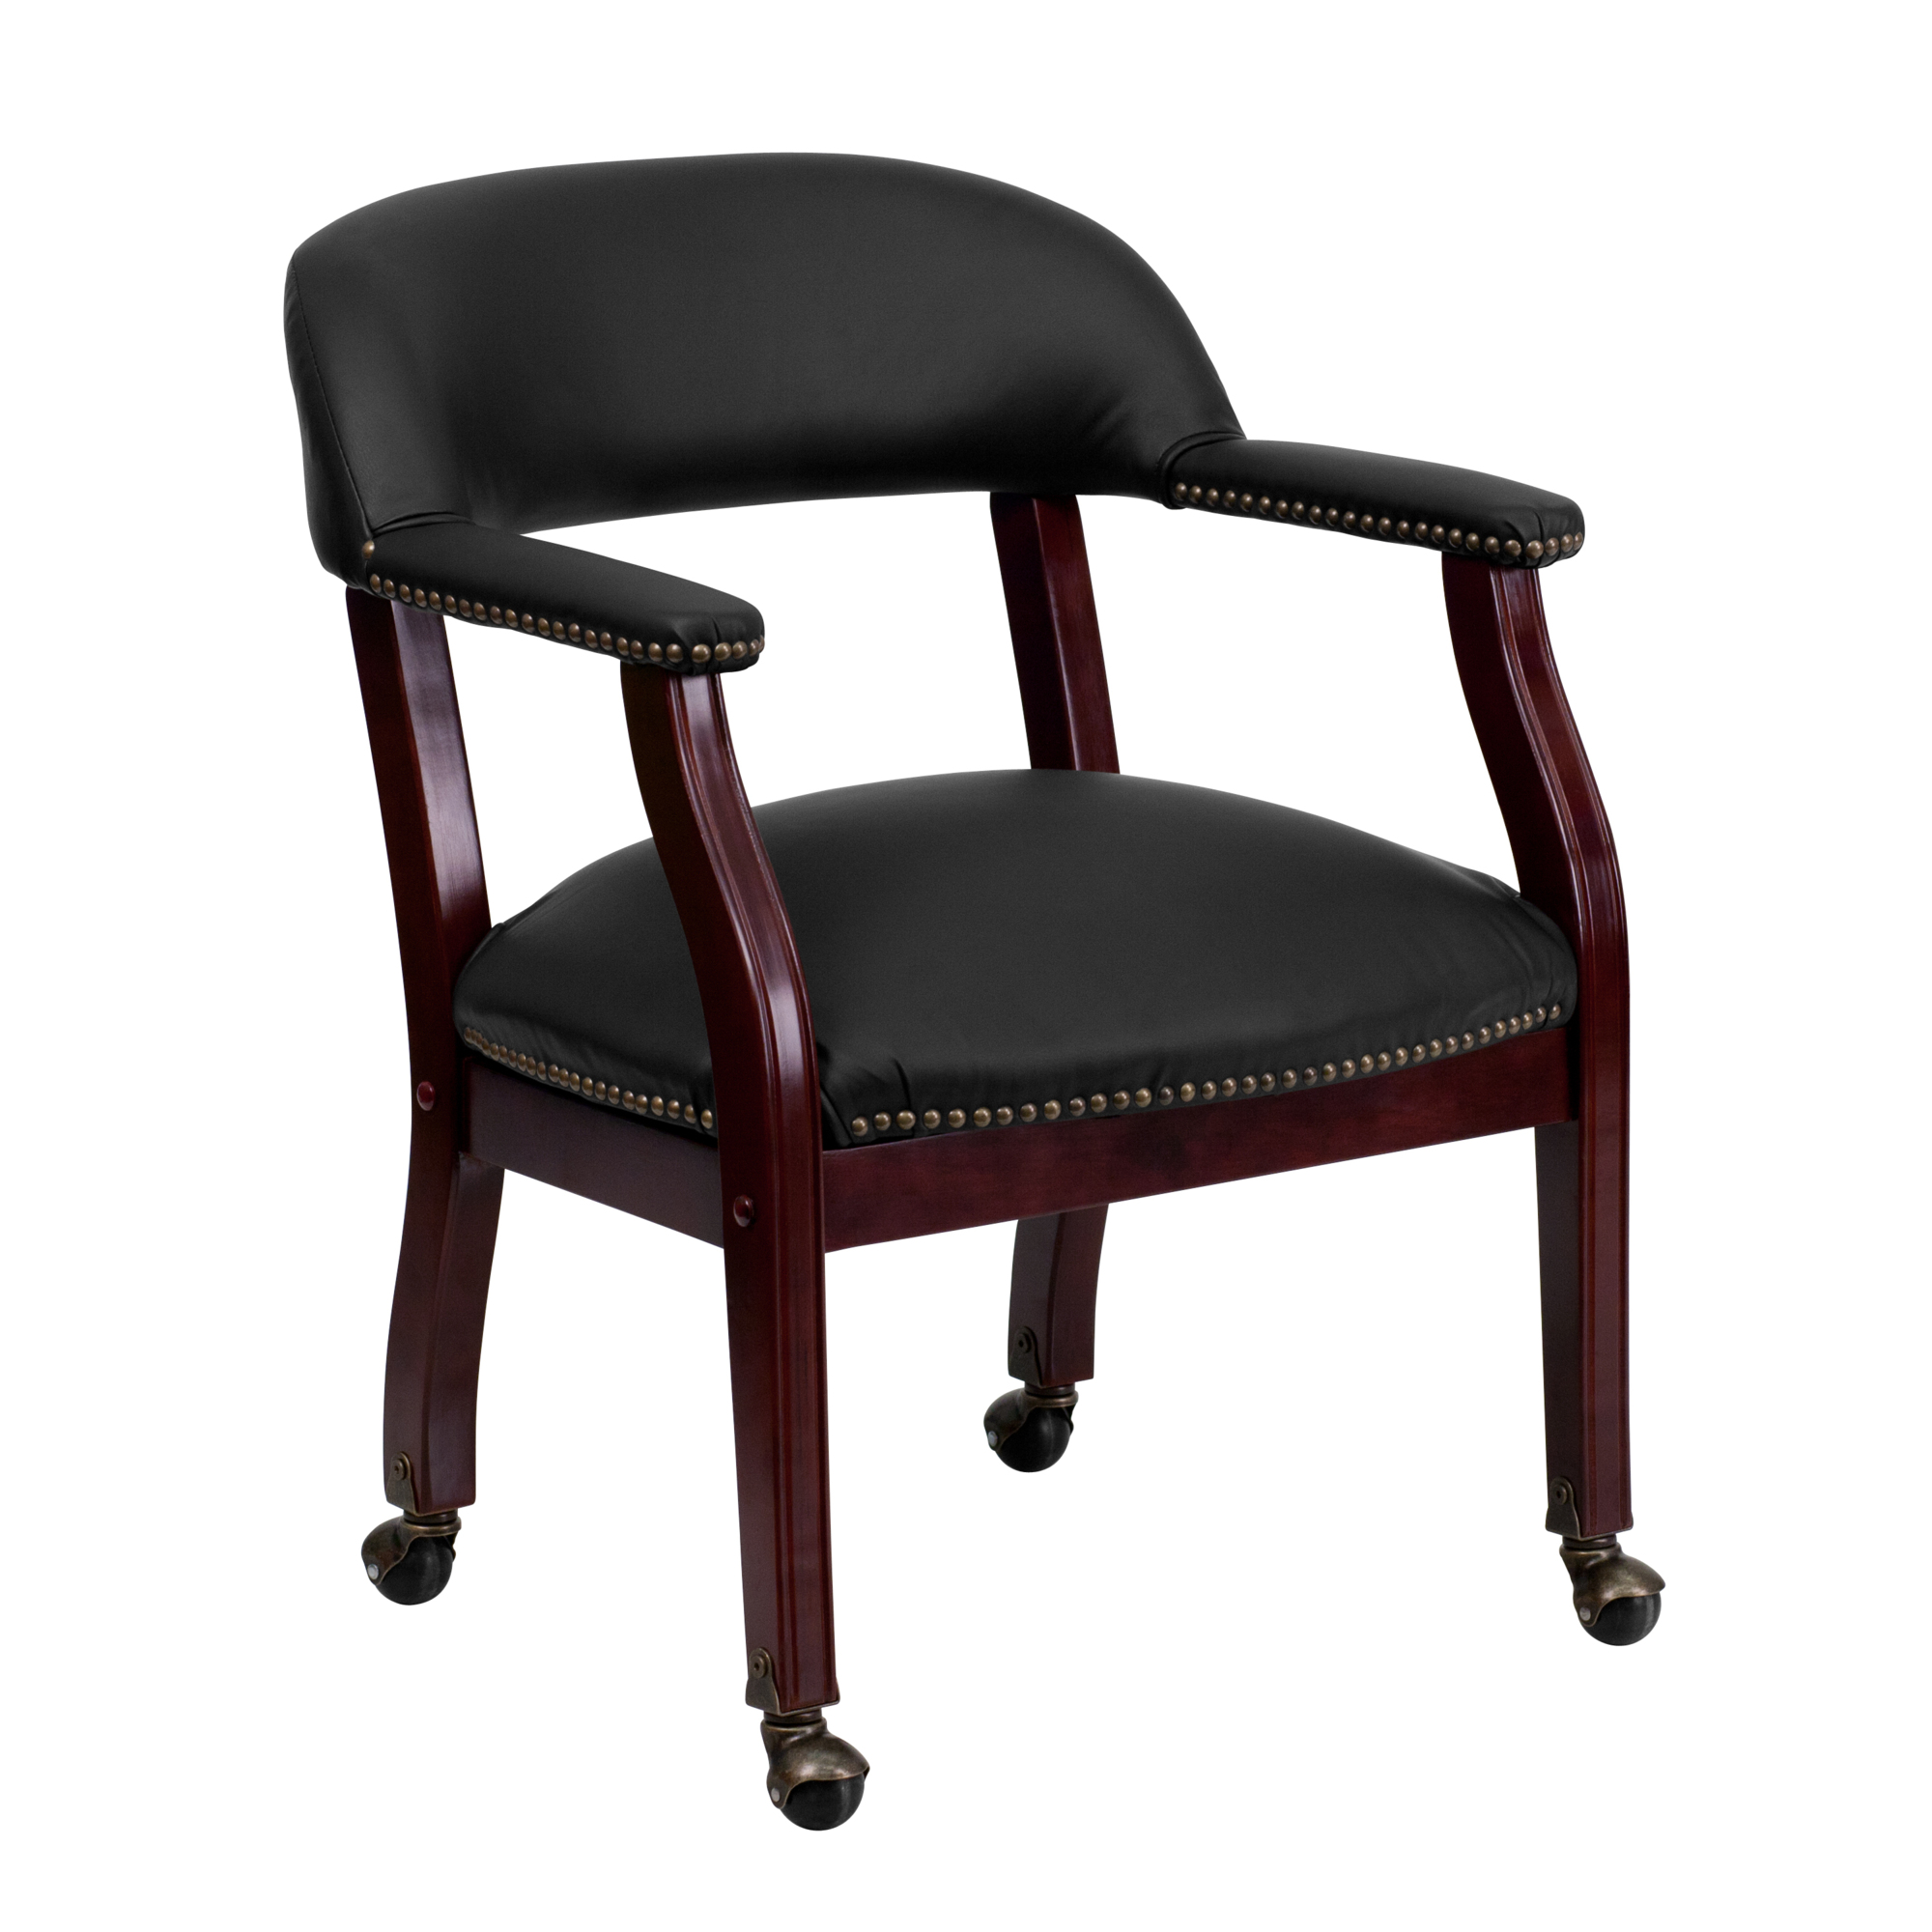 Flash Furniture, Black LeatherSoft Conference Chair with Casters, Primary Color Black, Included (qty.) 1, Model BZ100LFBKLEA